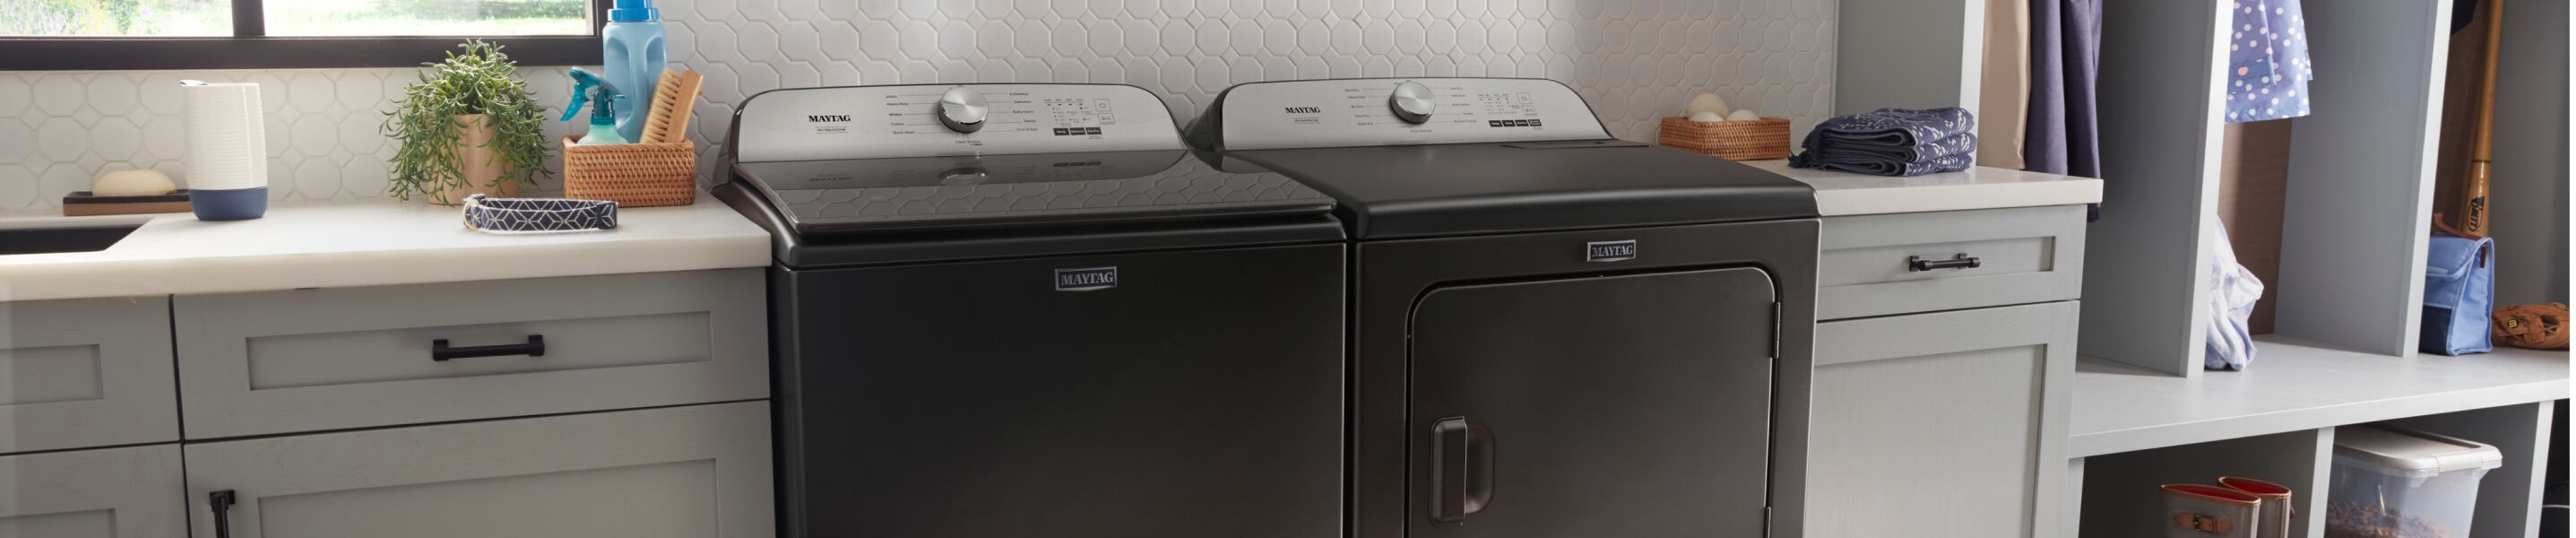 A Maytag® washer and dryer pair in a laundry room.